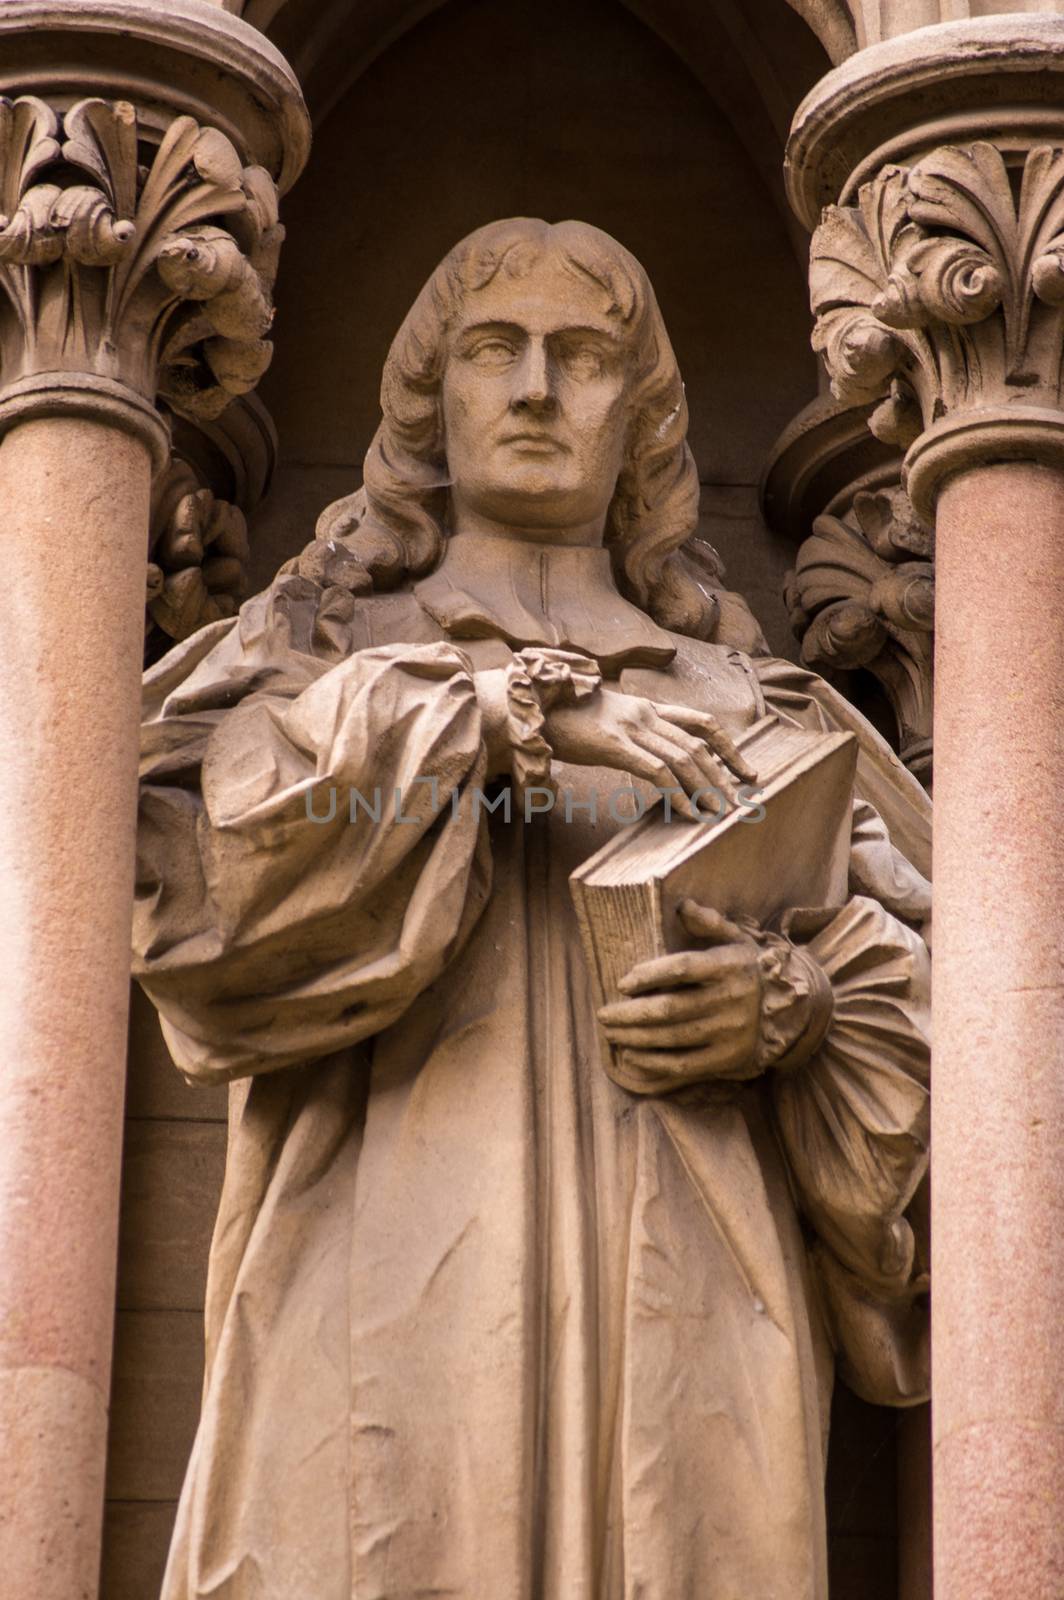 Statue of the former Bishop of Worcester Edward Stillingfleet (1635 - 1699). Outside the chapel of St John's College, Cambridge.